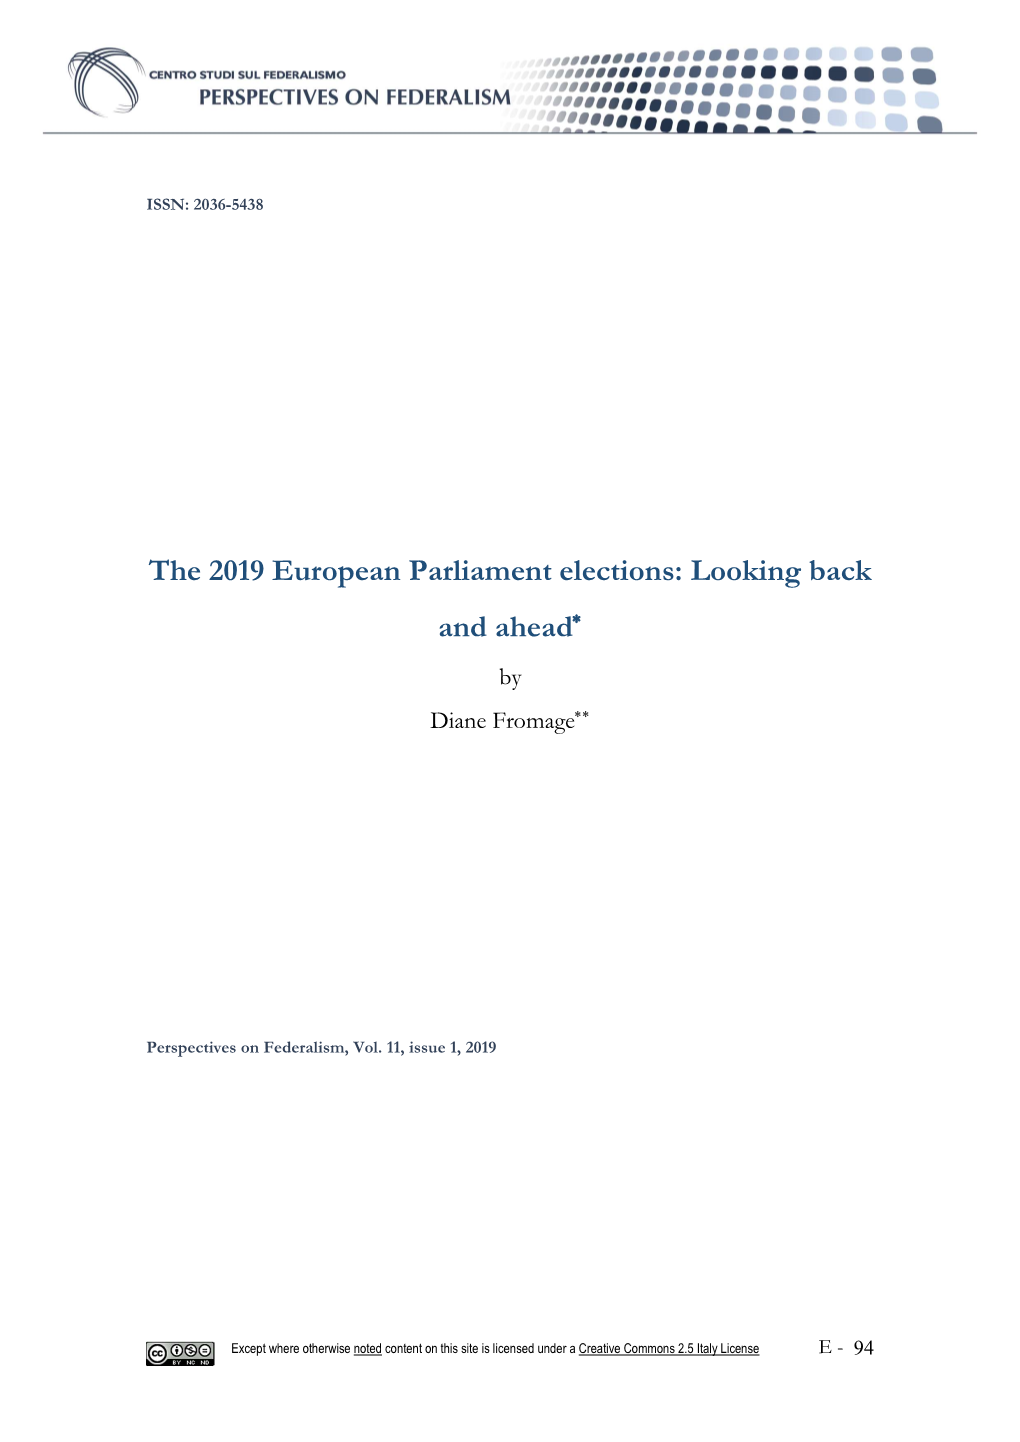 The 2019 European Parliament Elections: Looking Back and Ahead by Diane Fromage